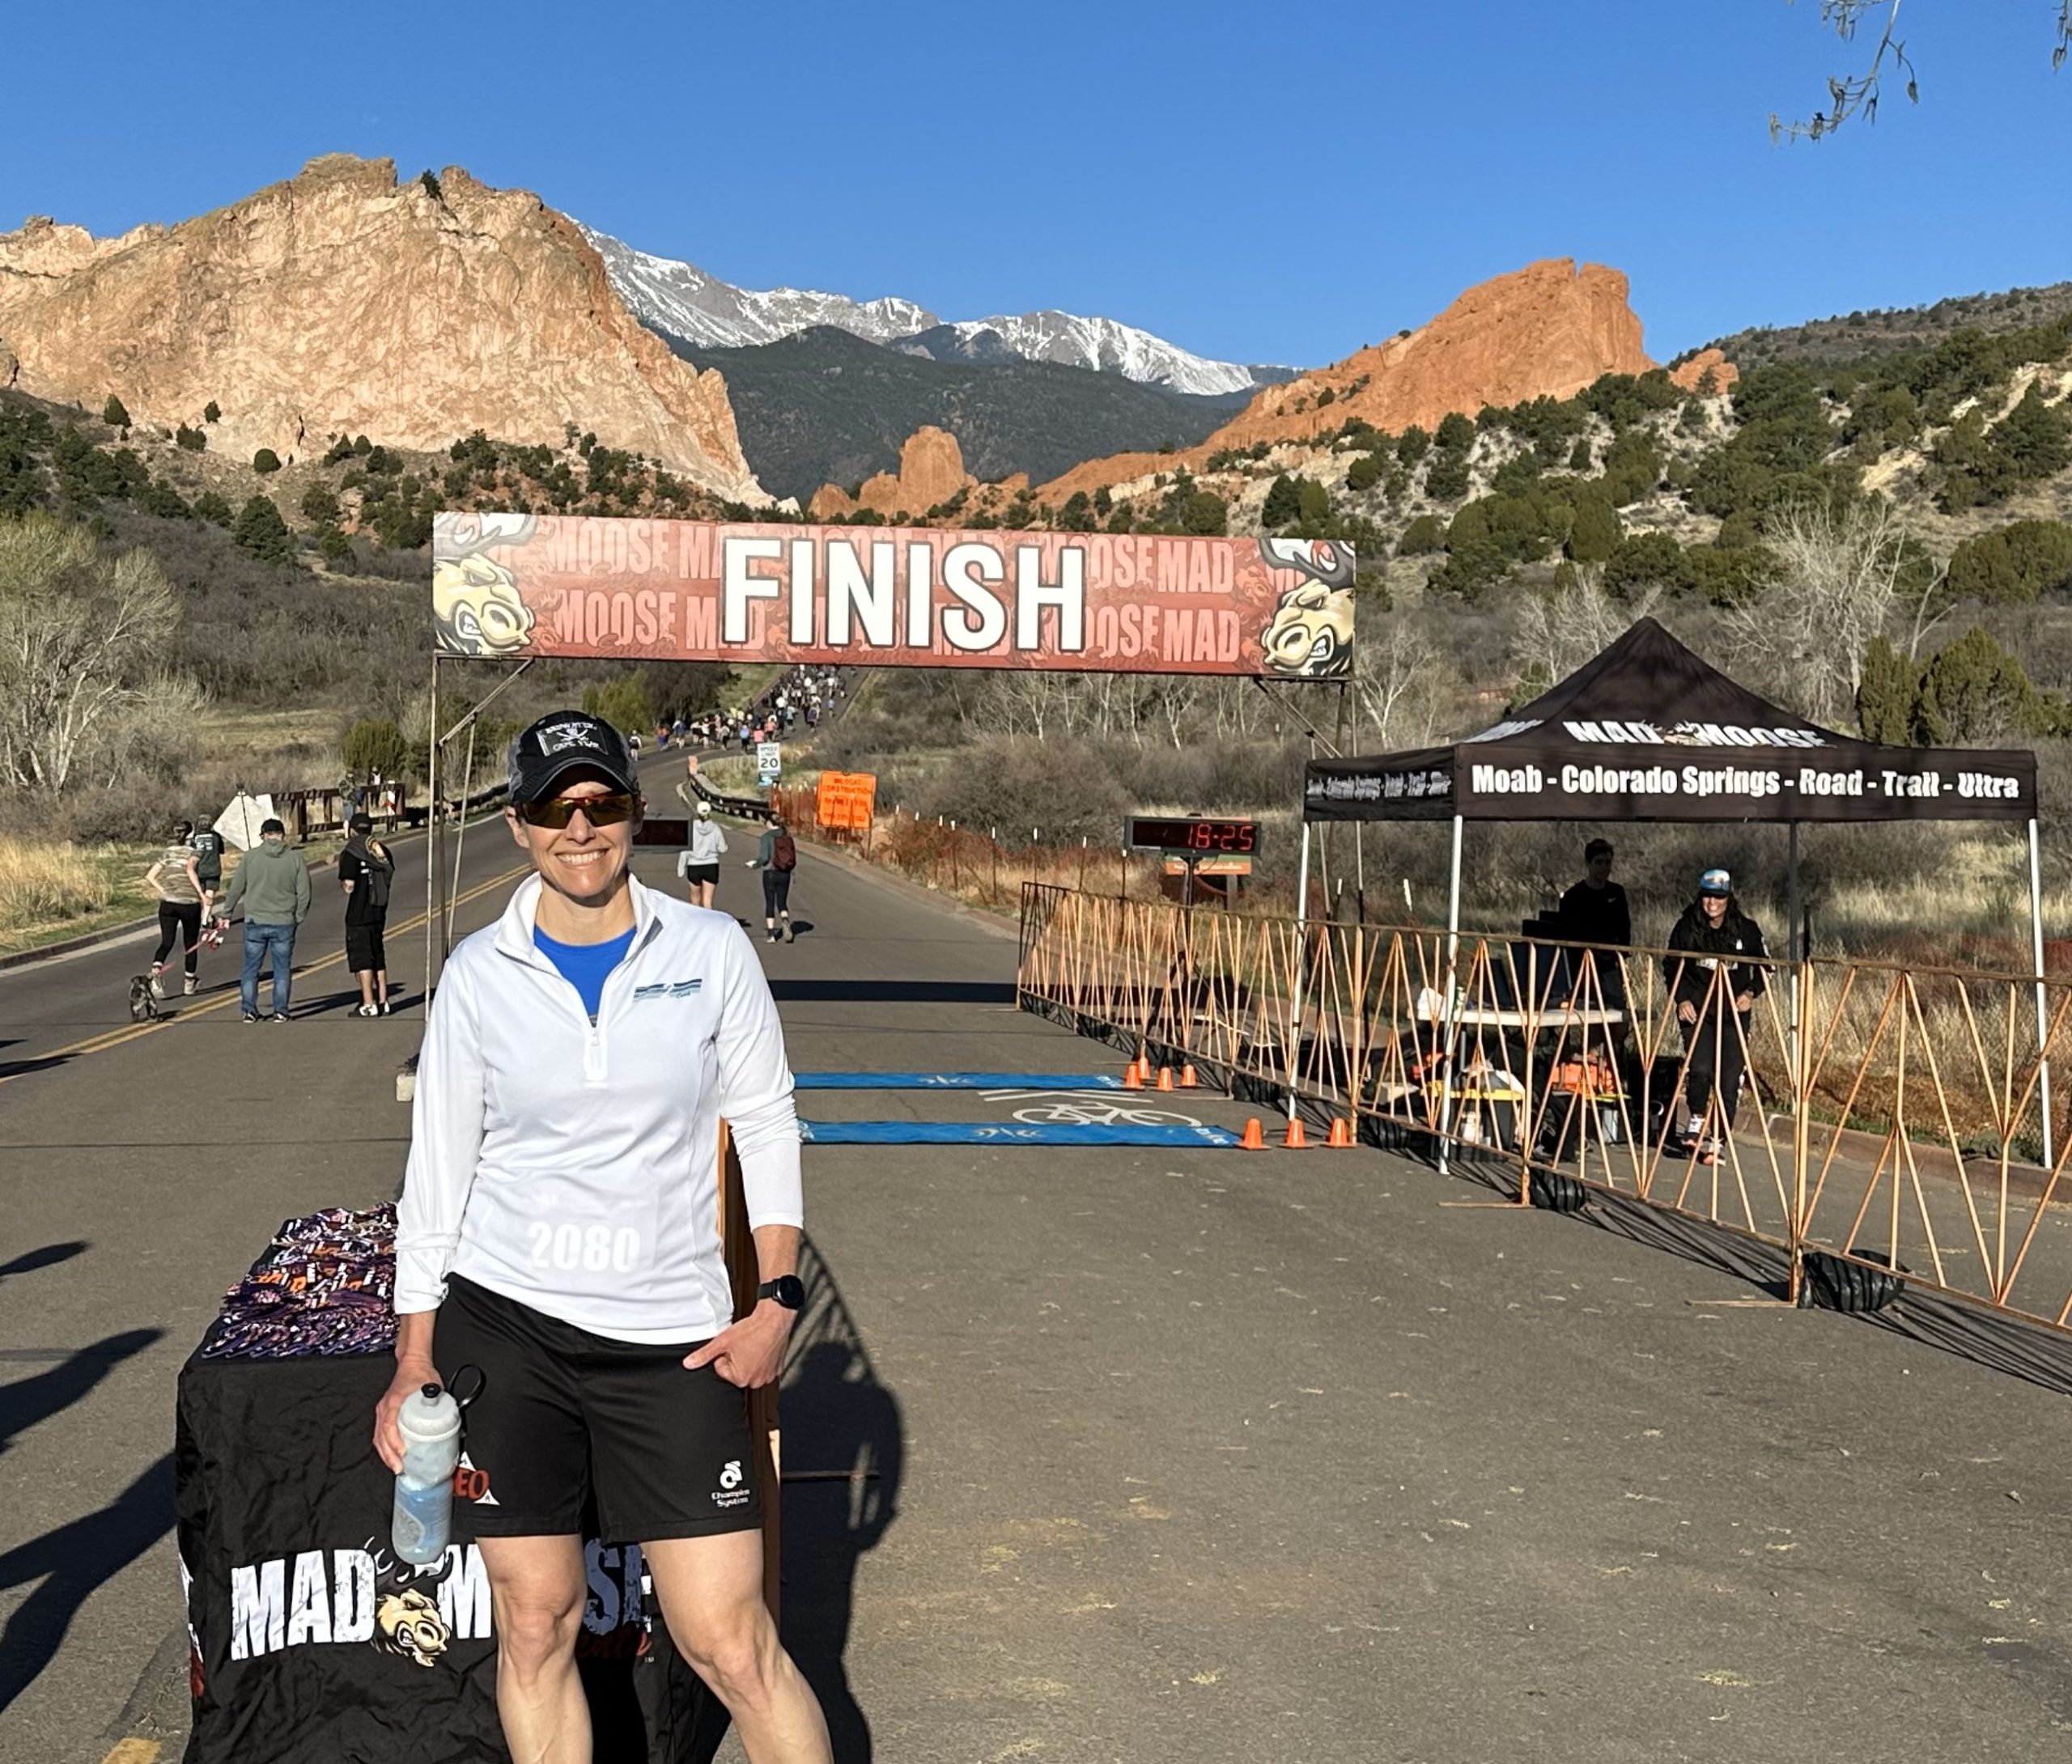 White woman in a white technical pullover, black ball cap, black shorts, and sunglasses is holding an insulated bike water bottle. She’s standing on a road at a race start/finish with the Finish line banner behind her. Further in the distance is mountain scrub, red rocks, and a snow capped mountain.